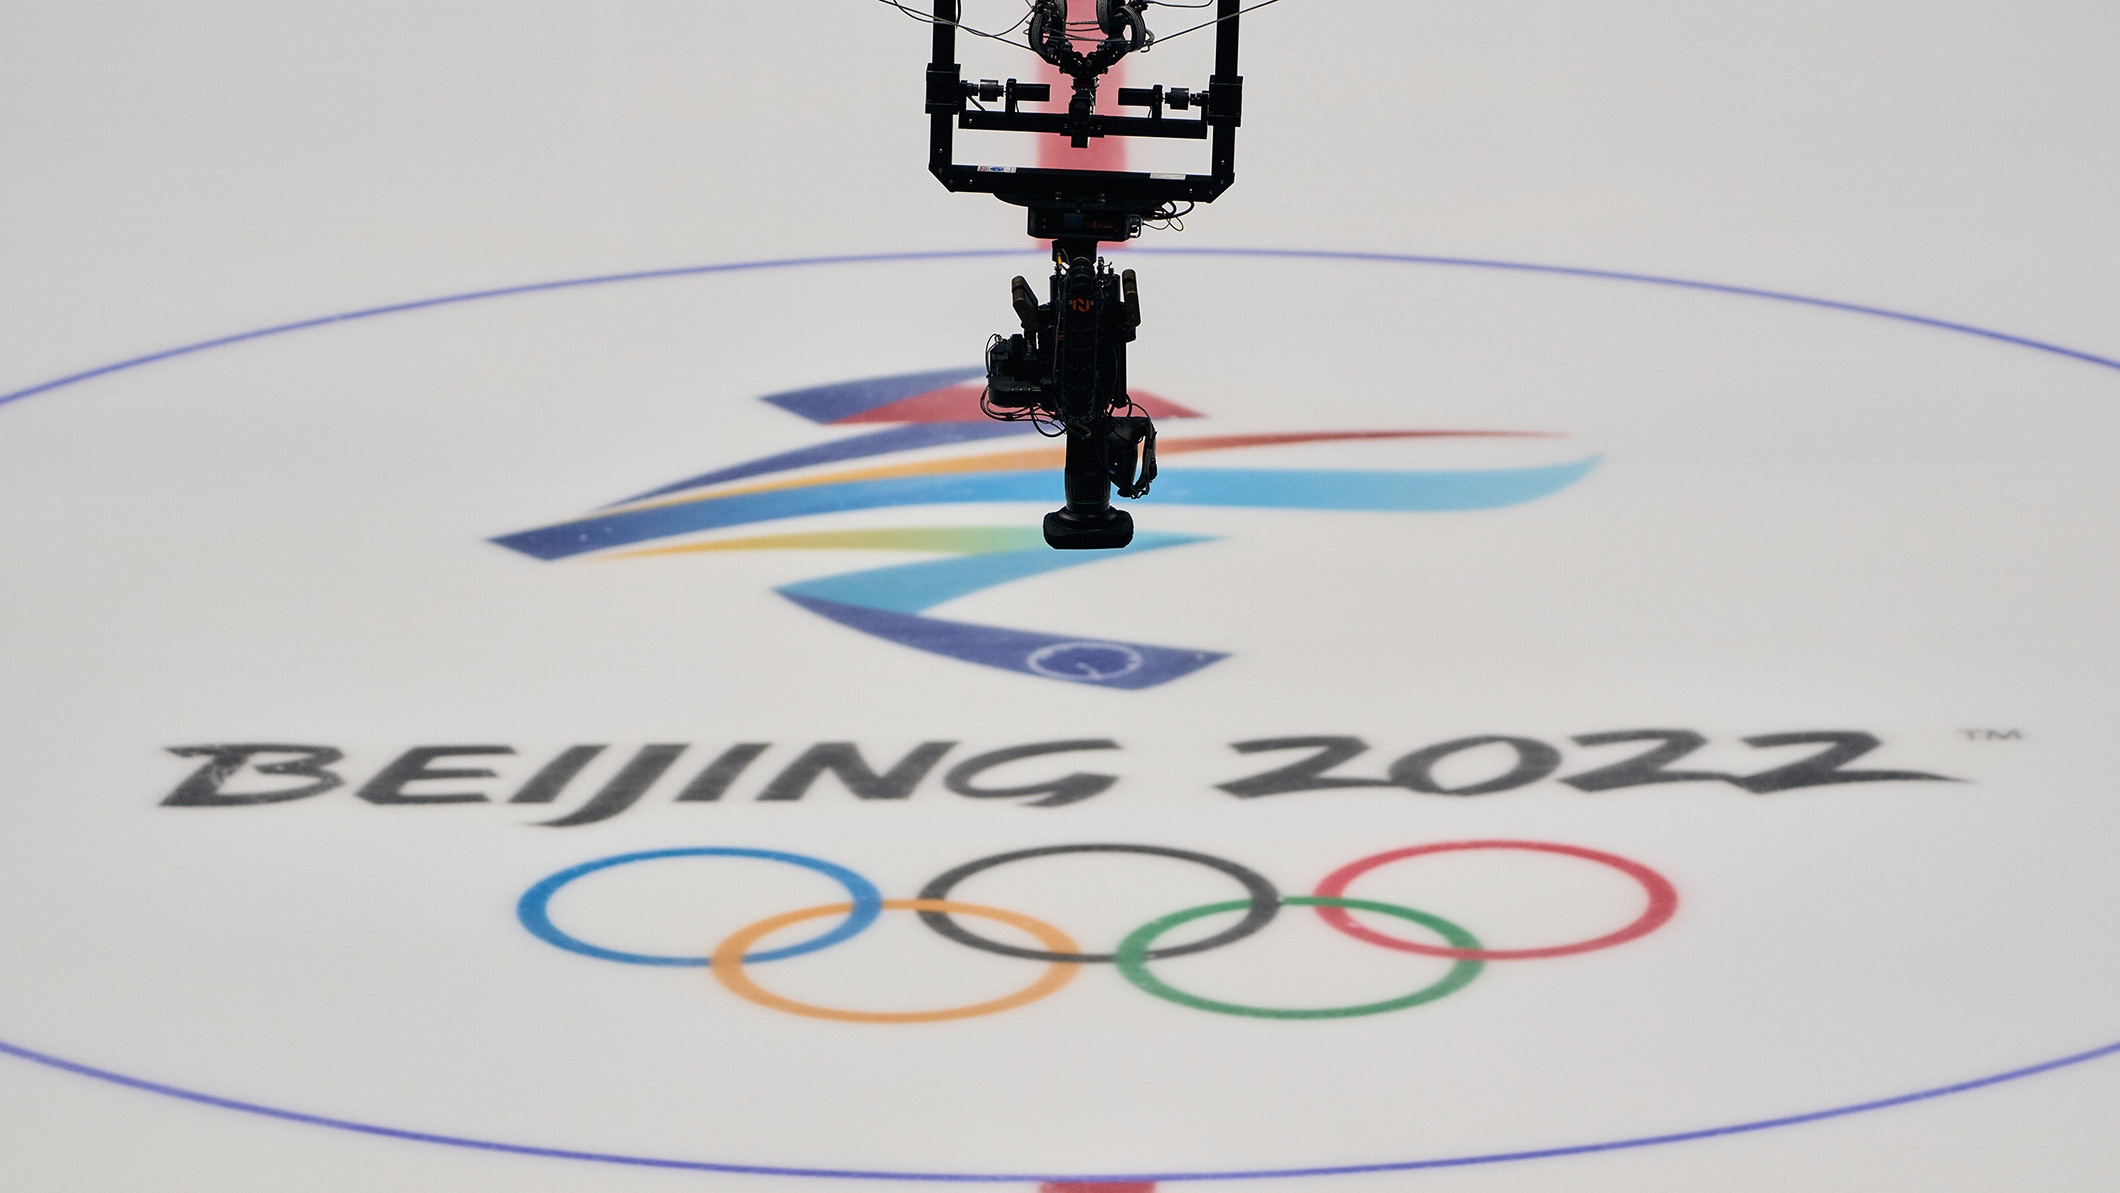 Beijing 2022 set to be the most immersive Olympic Winter Games yet